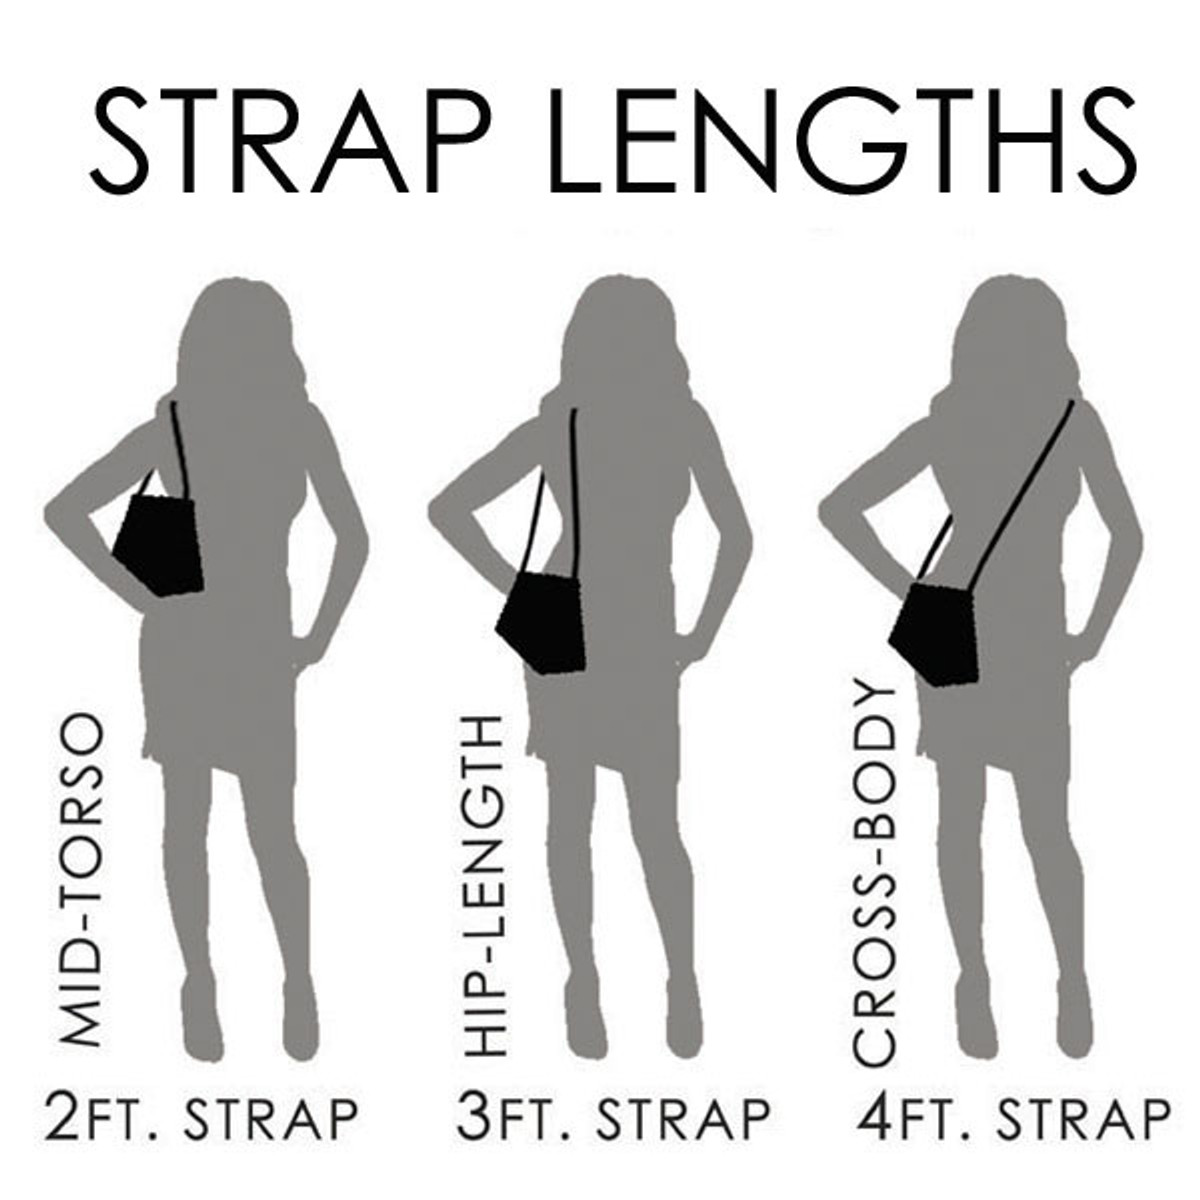 How to Adjust Strap Length Quickly from Crossbody to Shoulder Position –  Mautto